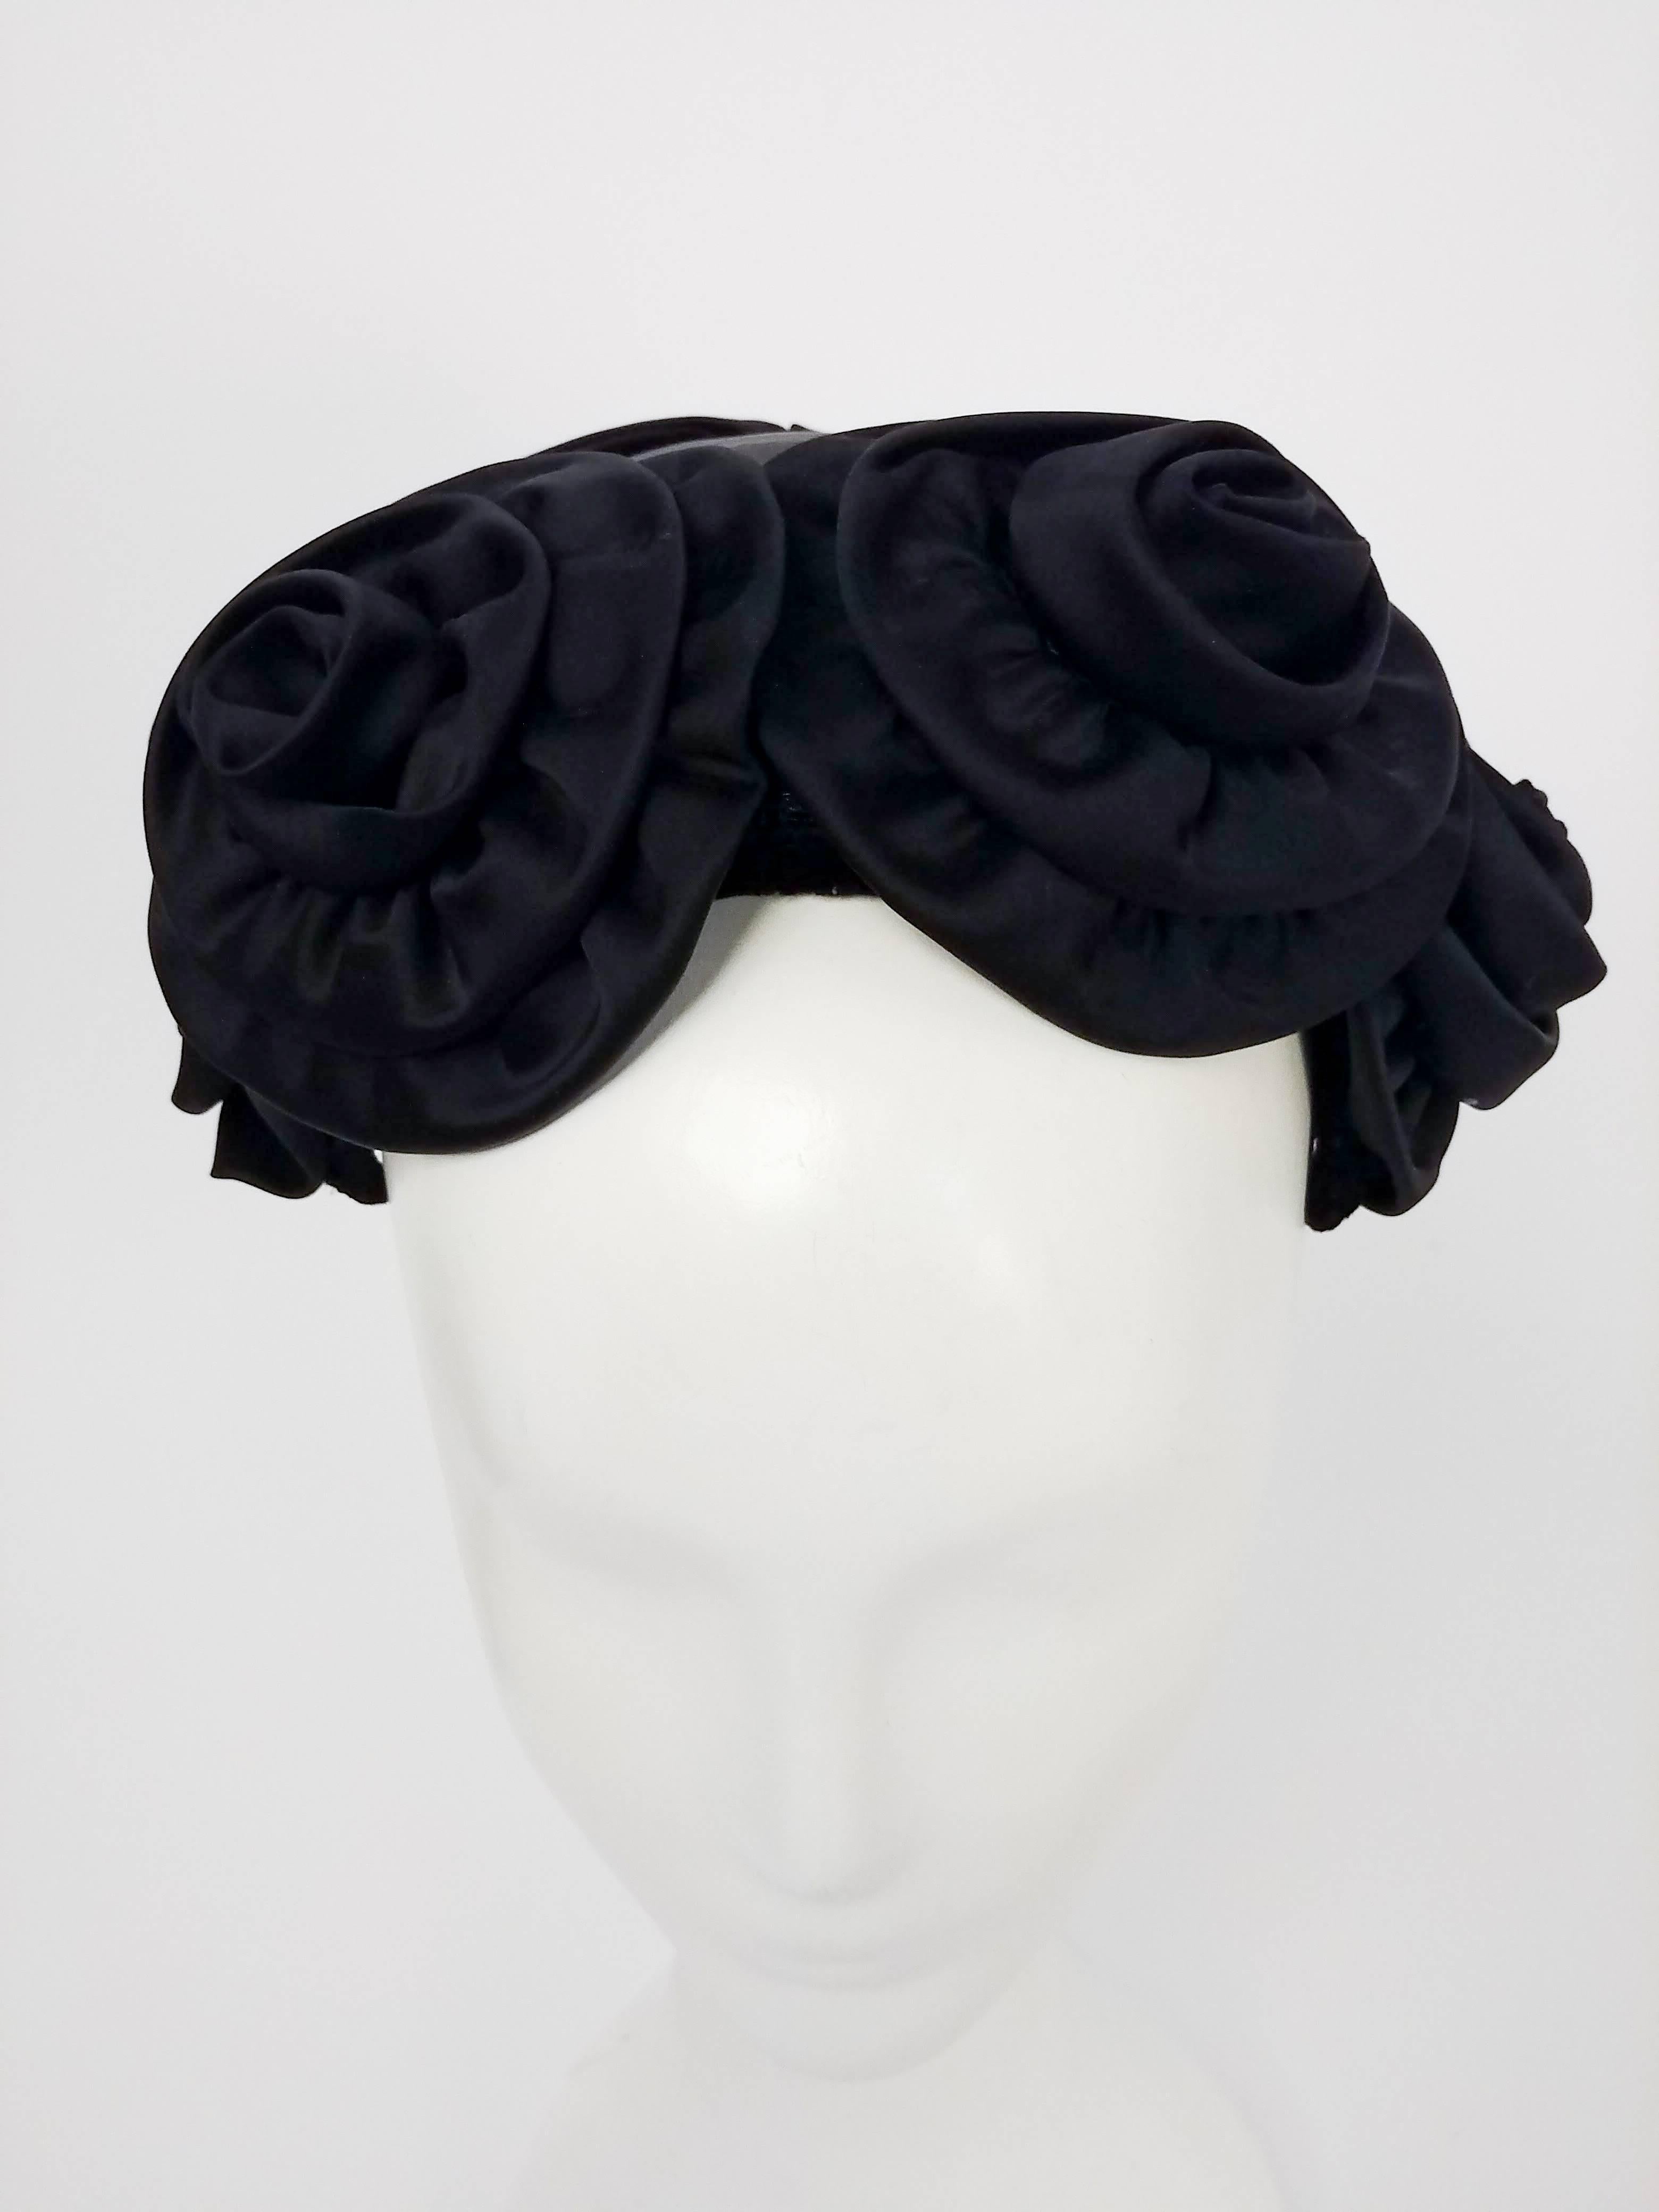 1950s Black Rosette Cocktail Hat. Four large rosettes adorn the top of this fabulous 1950s cocktail hat, finished in the back with a large bow. Lined in lace, velvet trim.